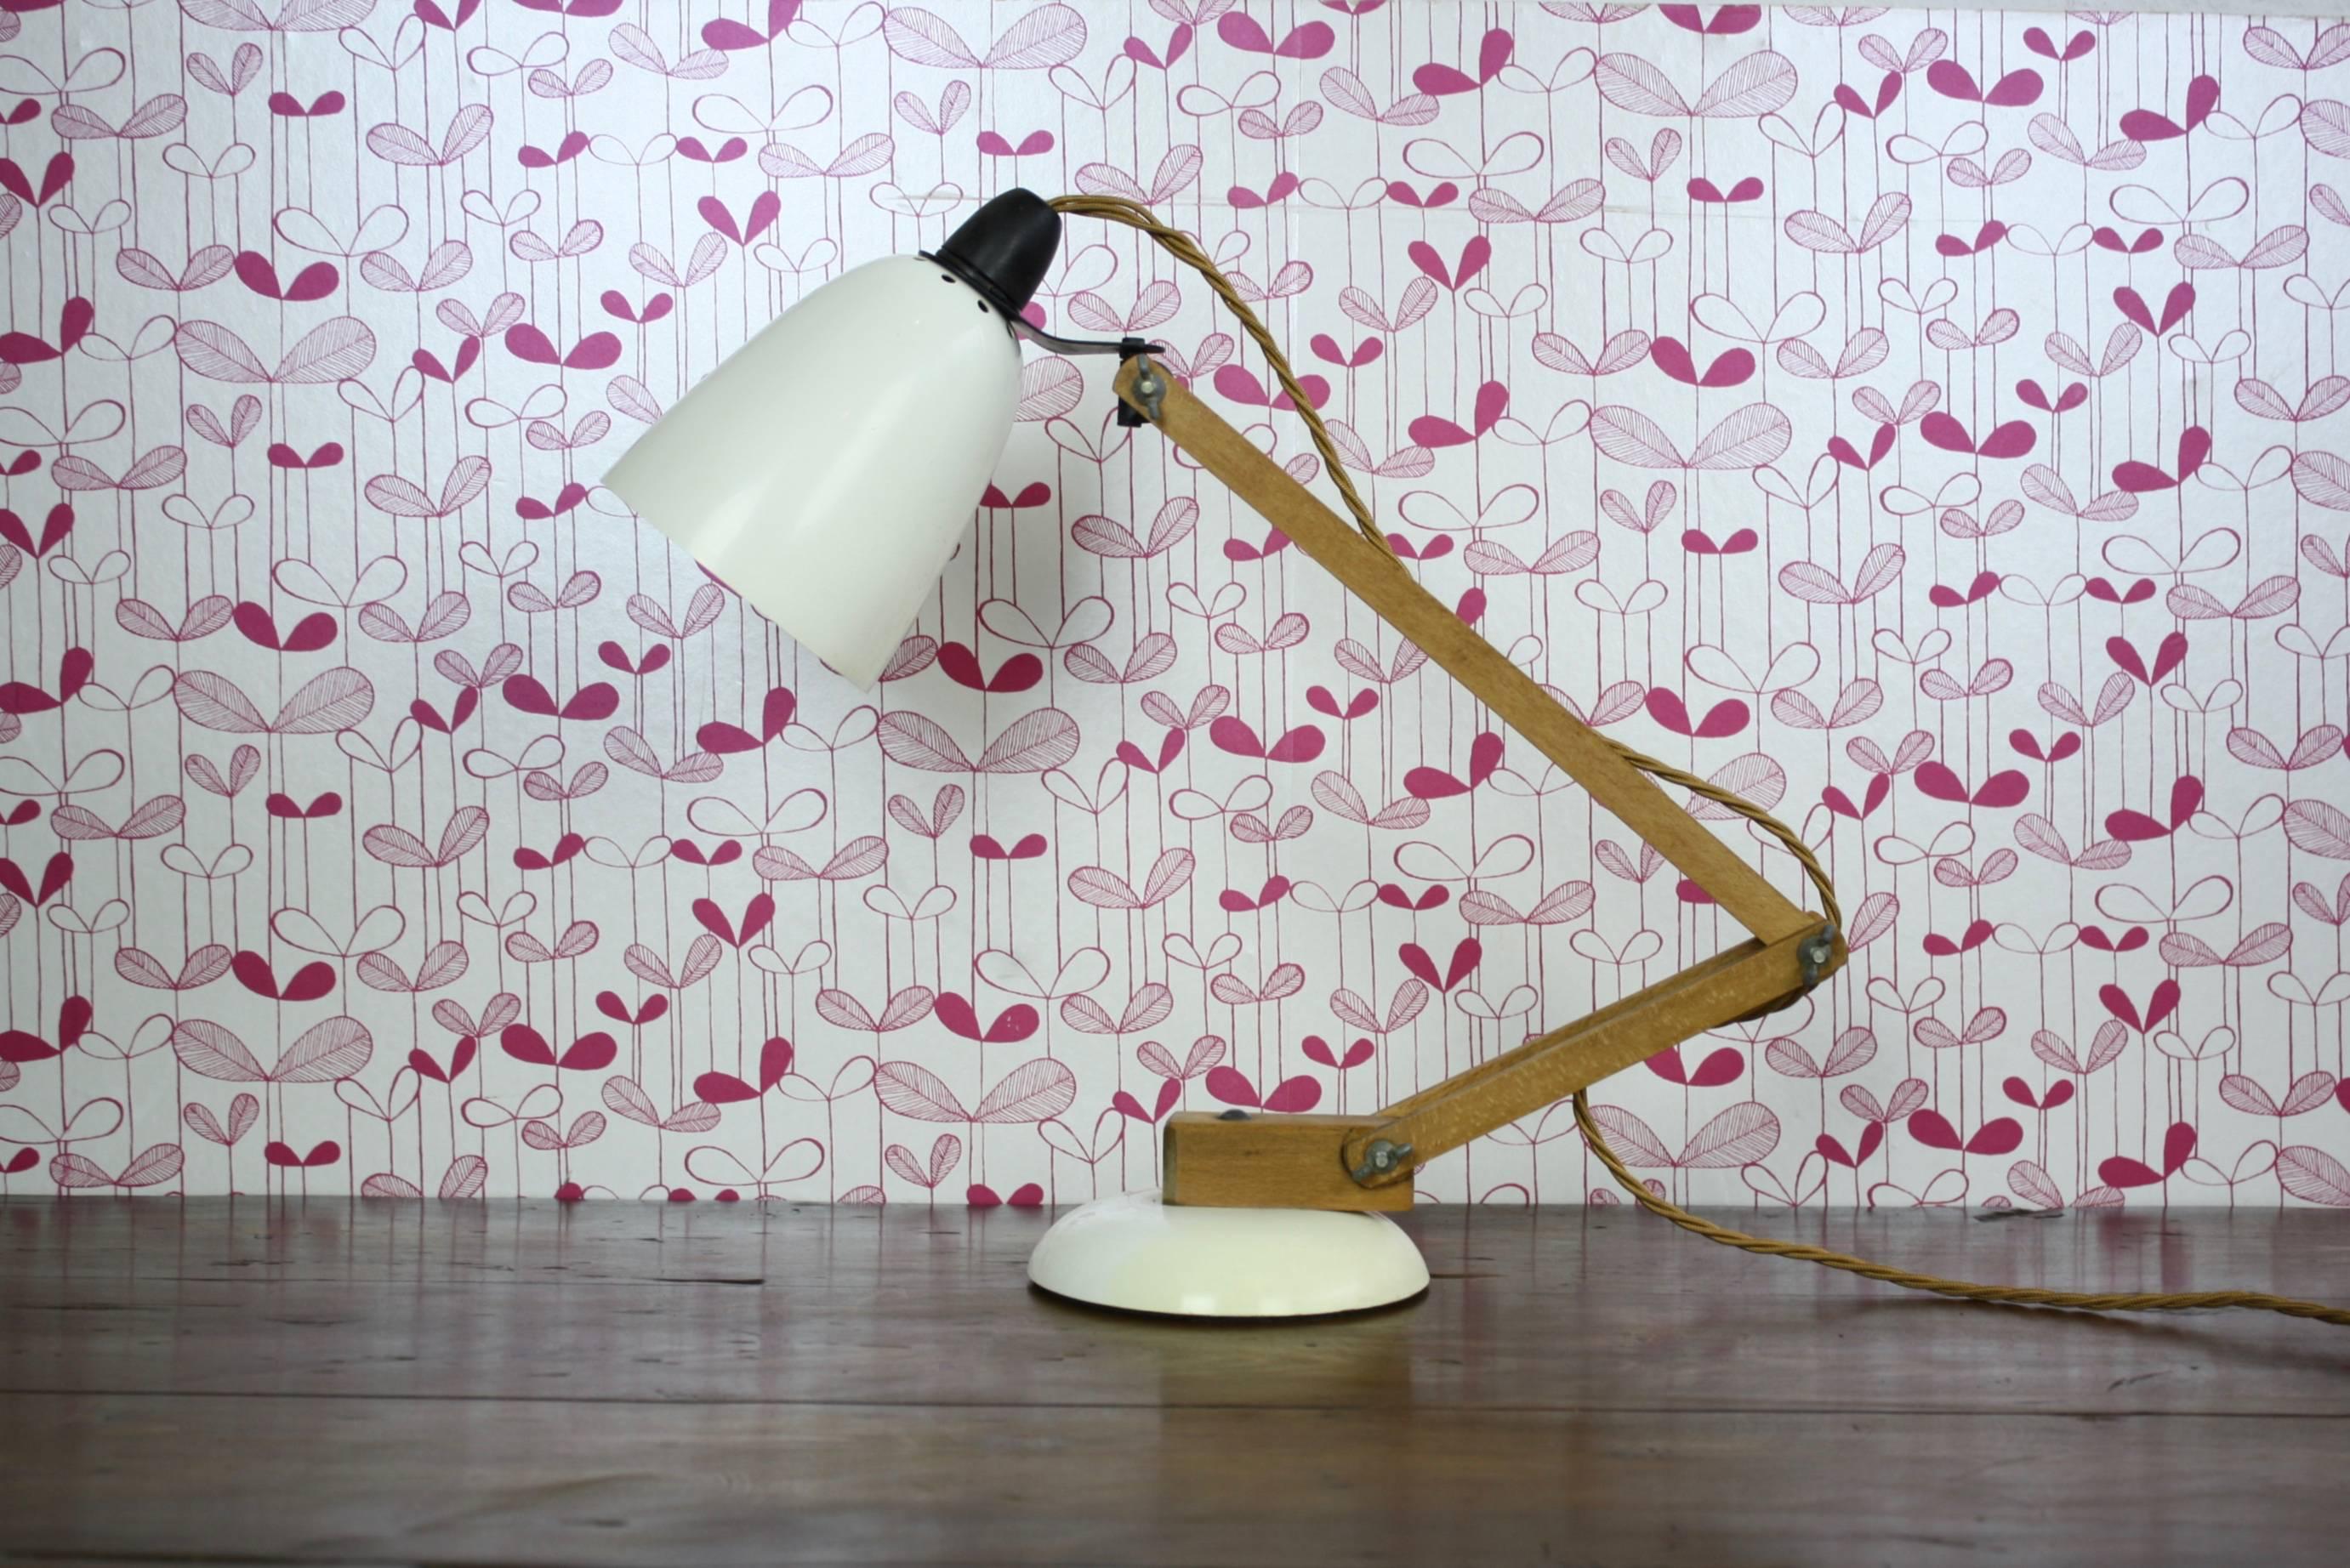 A vintage white Maclamp desk/table lamp with wooden arms. Original bulbholder and vintage style braided flex.

Designed by Terence Conran for Habitat in the 1950s, this lamp is an icon of the 1950s-1960s period.

In good vintage condition with a